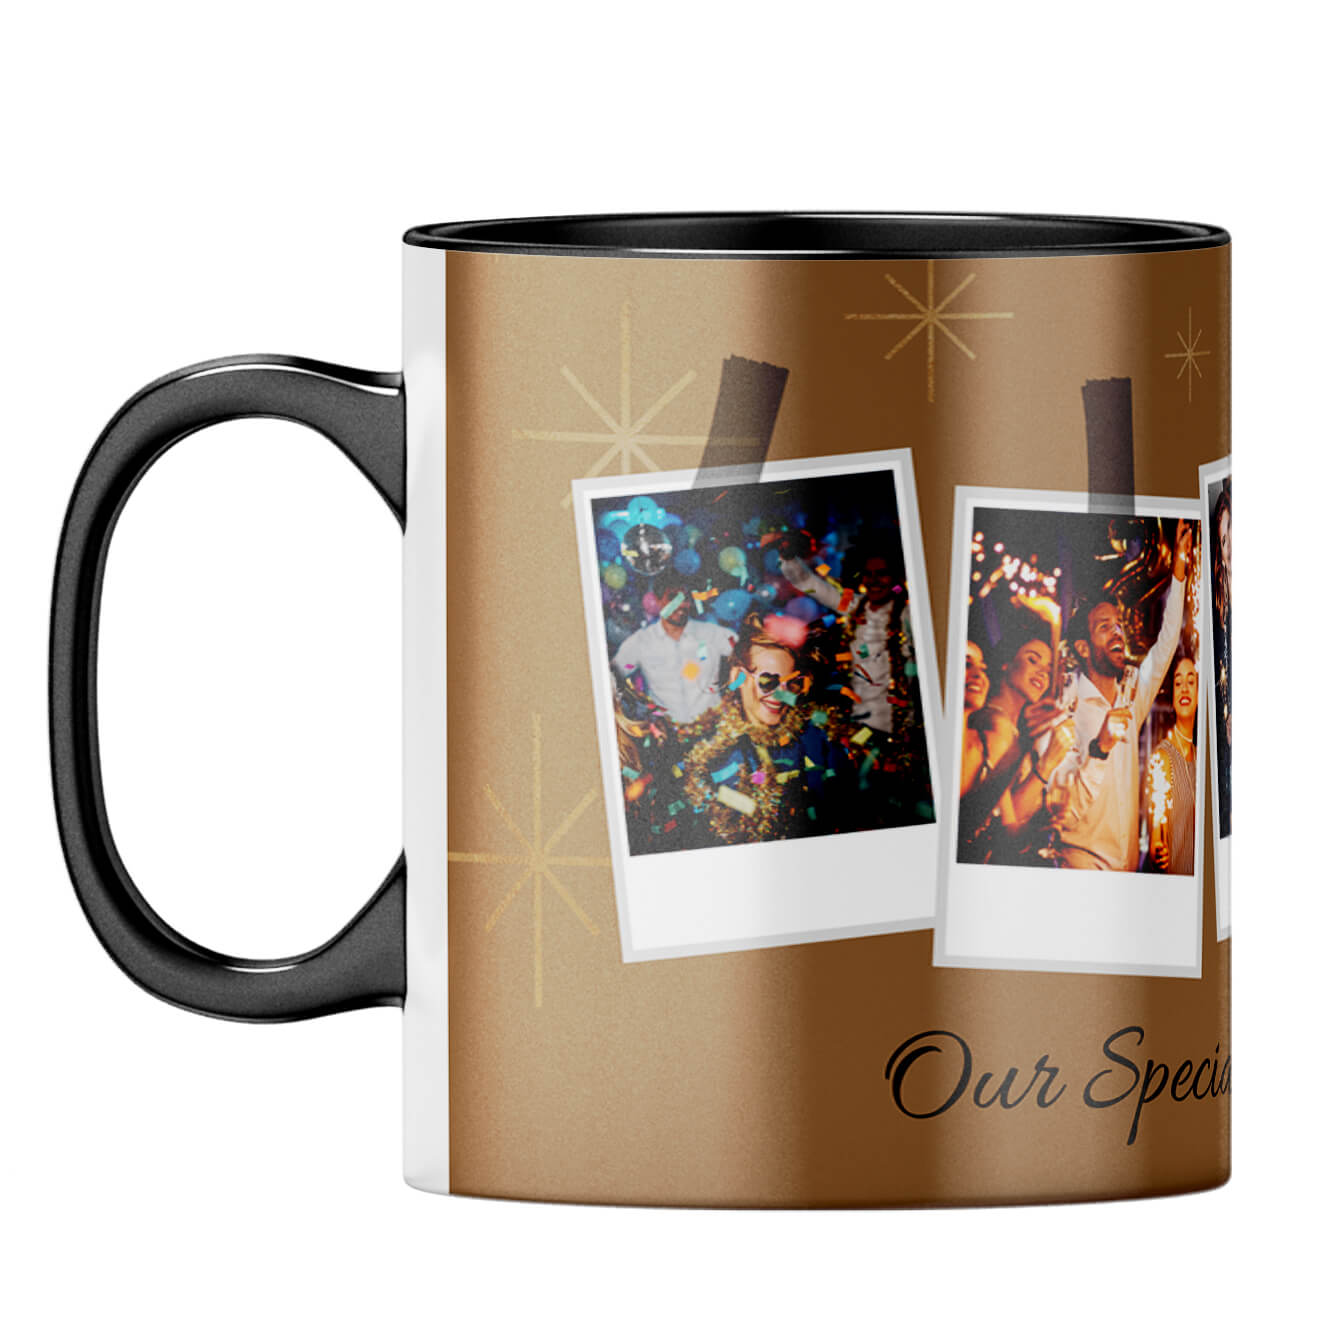 Our Special Moments Together Coffee Mug